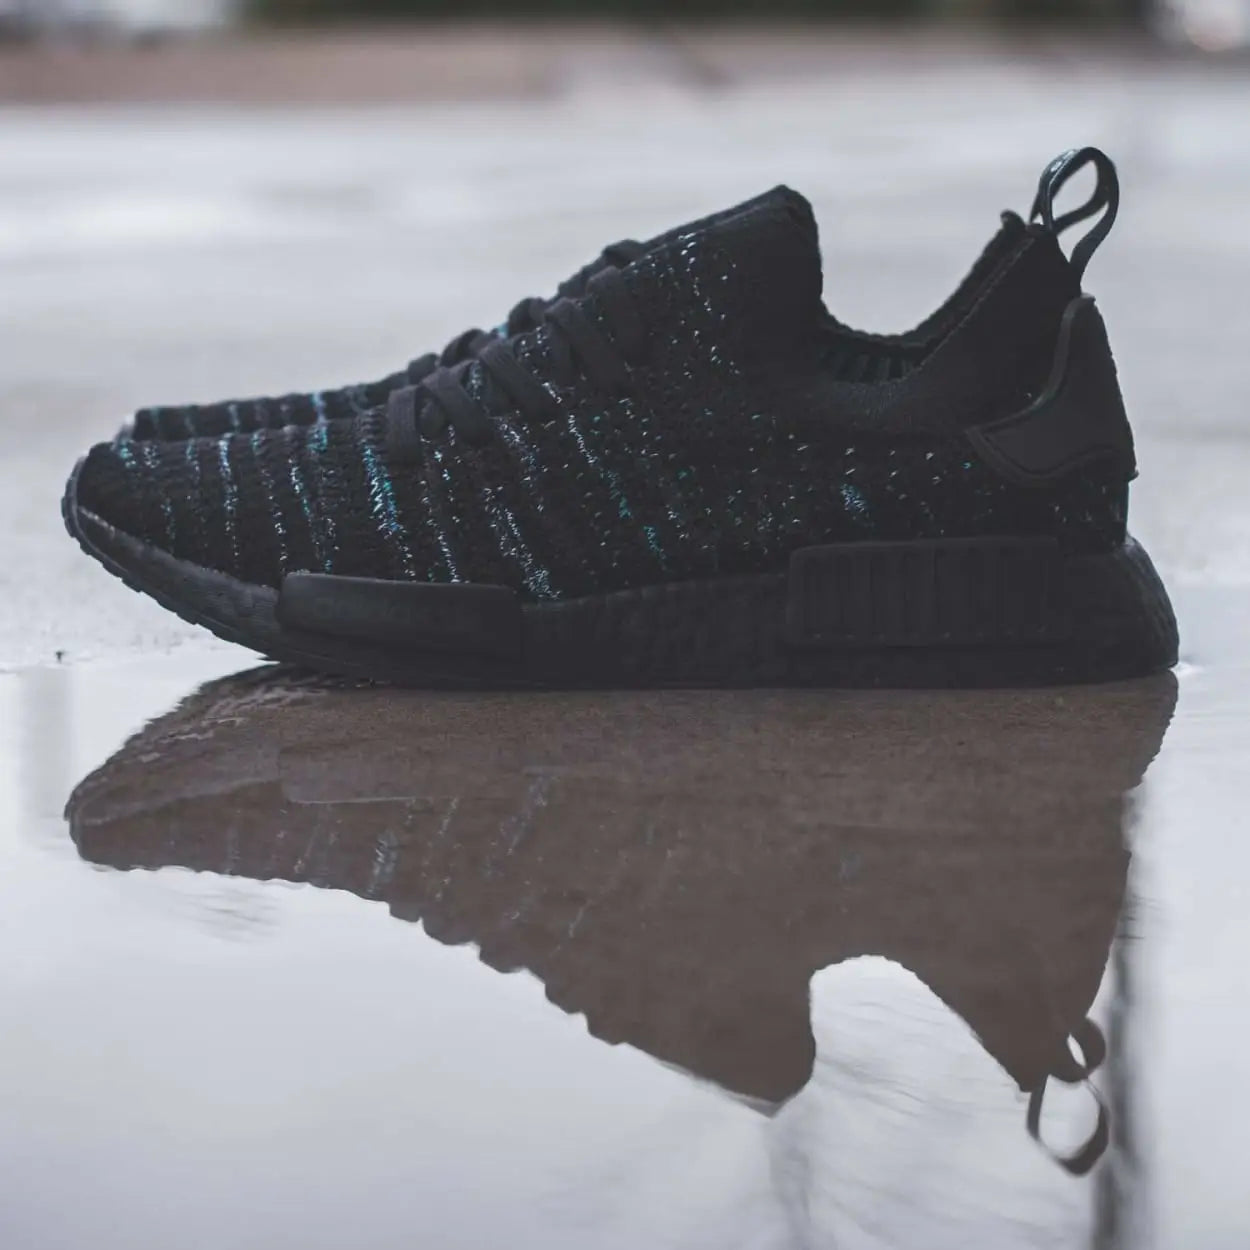 Parley for the Oceans x adidas Originals NMD STLT PK in Core Black - (AQ0943)